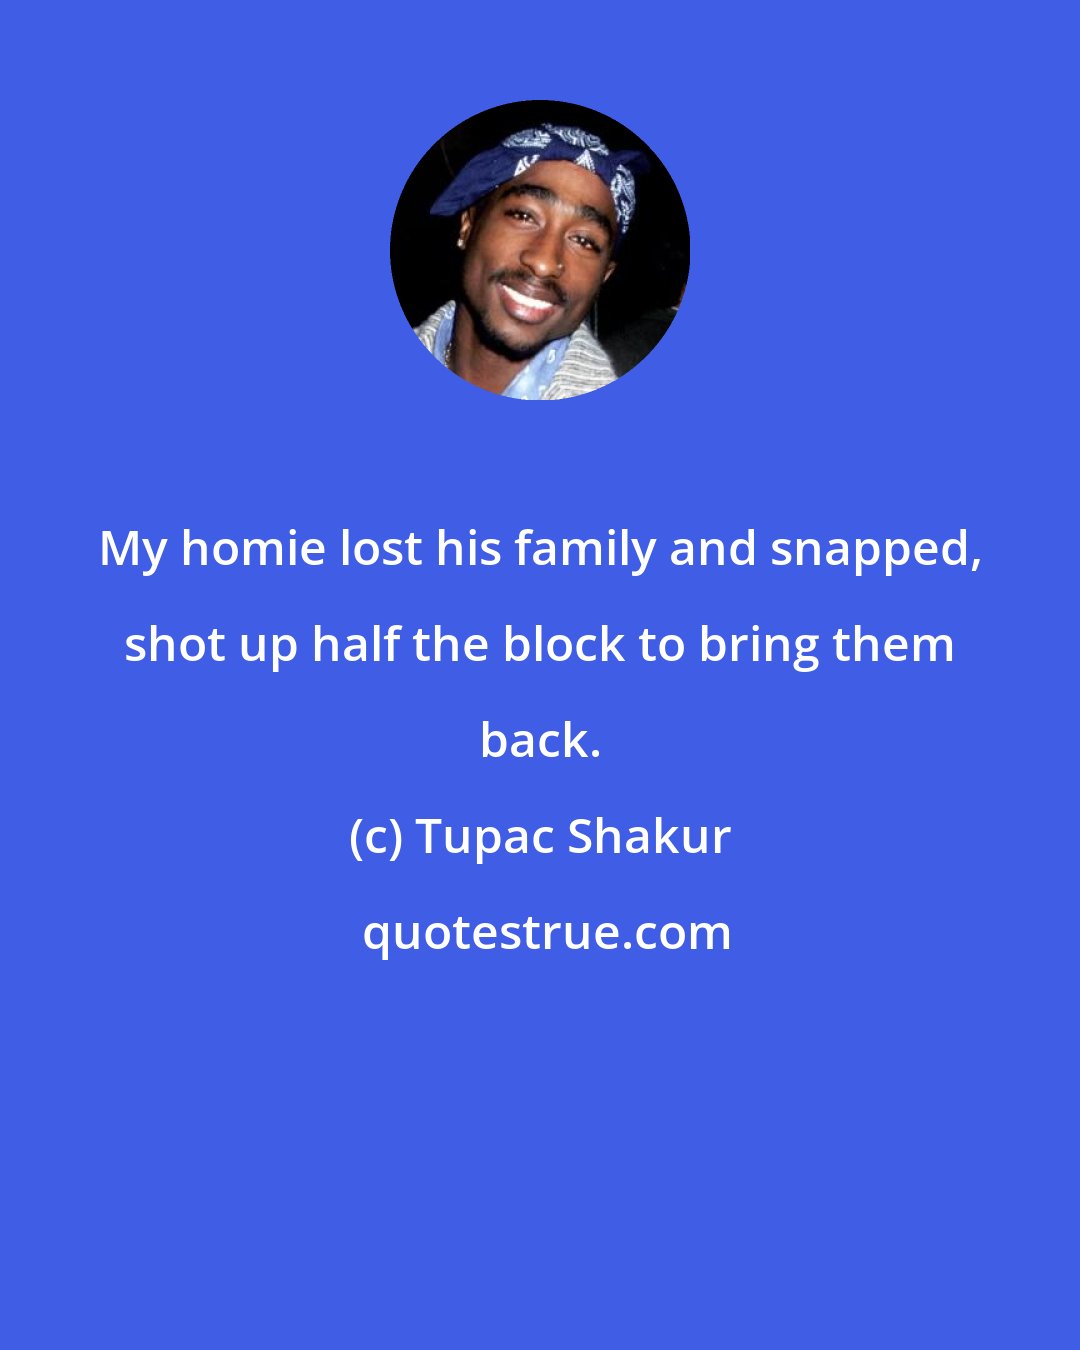 Tupac Shakur: My homie lost his family and snapped, shot up half the block to bring them back.